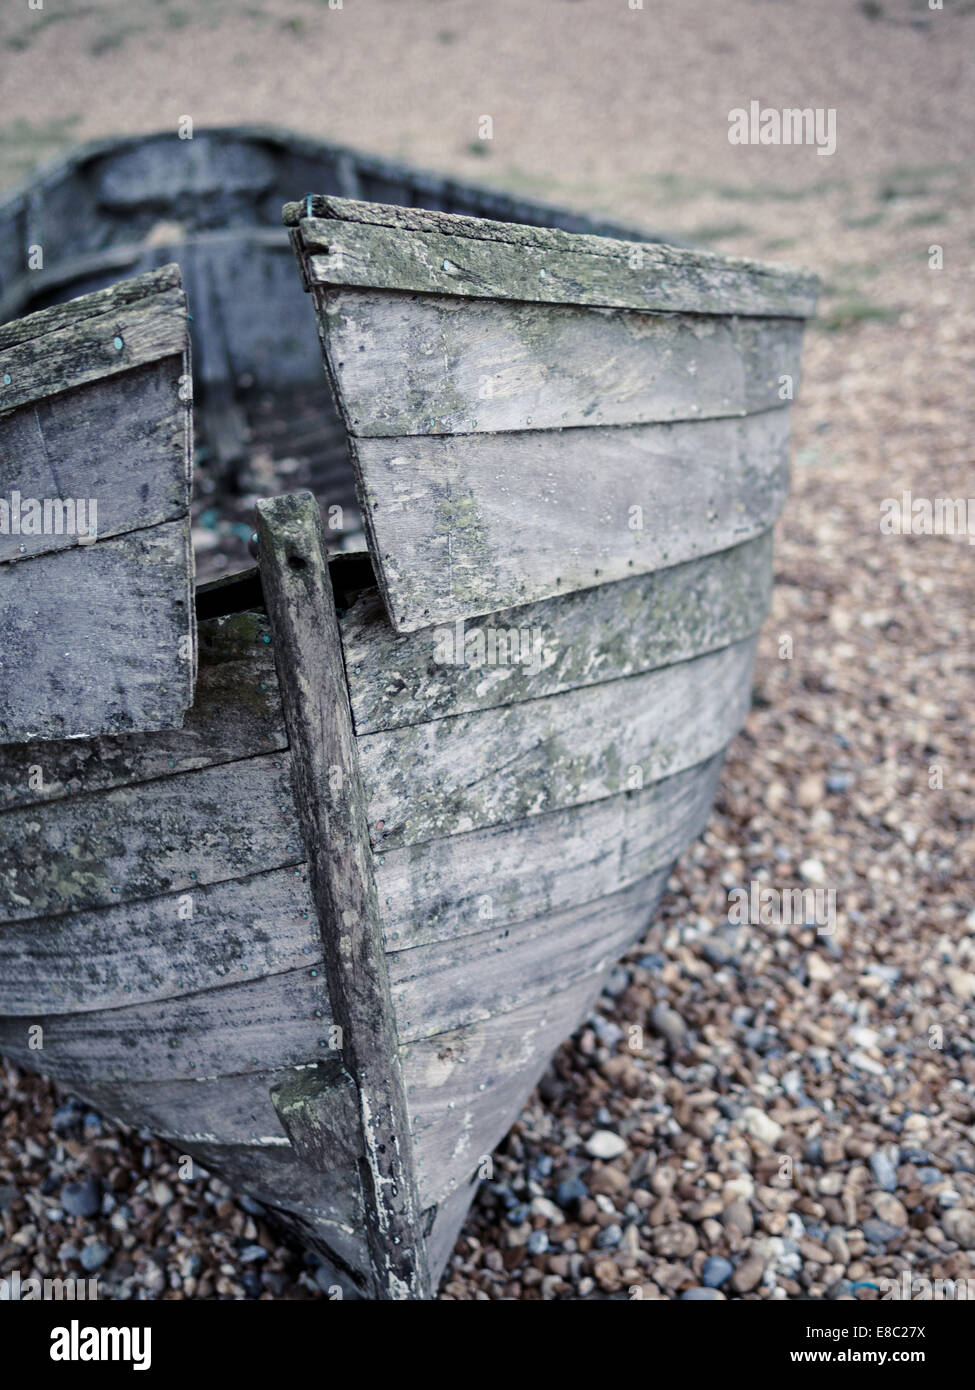 Boat wreck on pebble beach at Dungeness, Kent, England, UK. Stock Photo